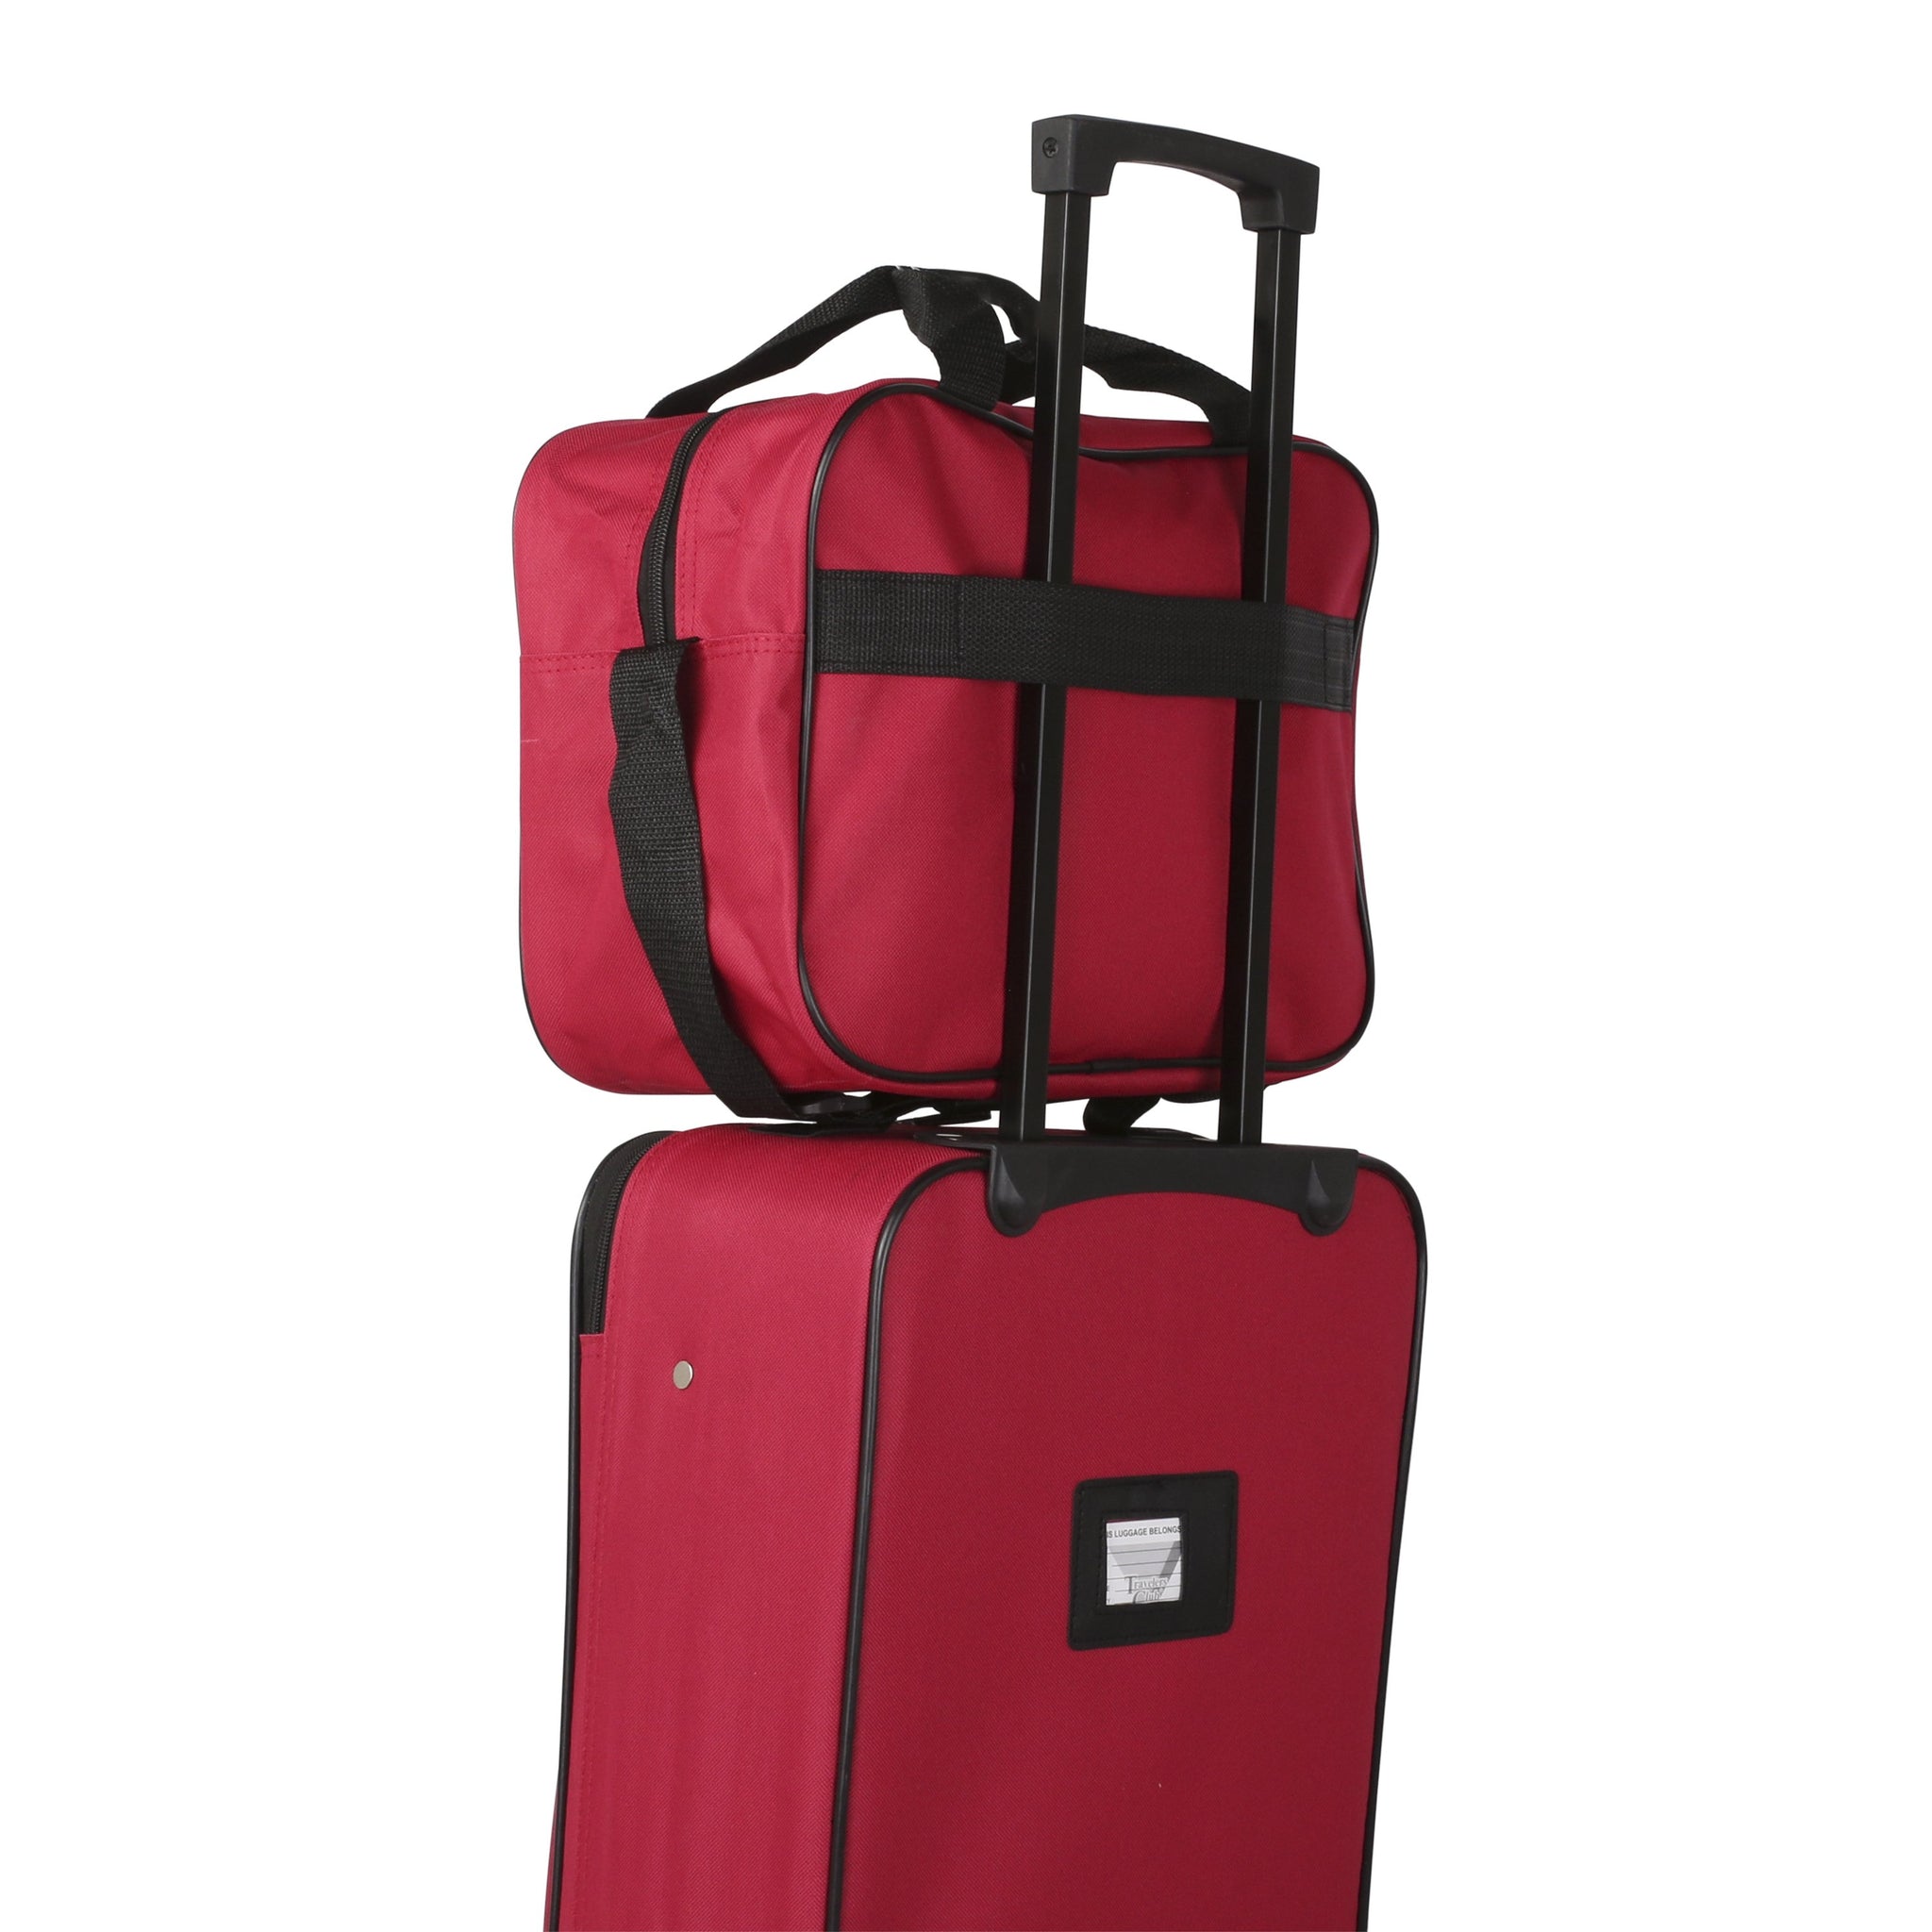 Genova II Expandable Luggage and Accessories Set - 4-Pc